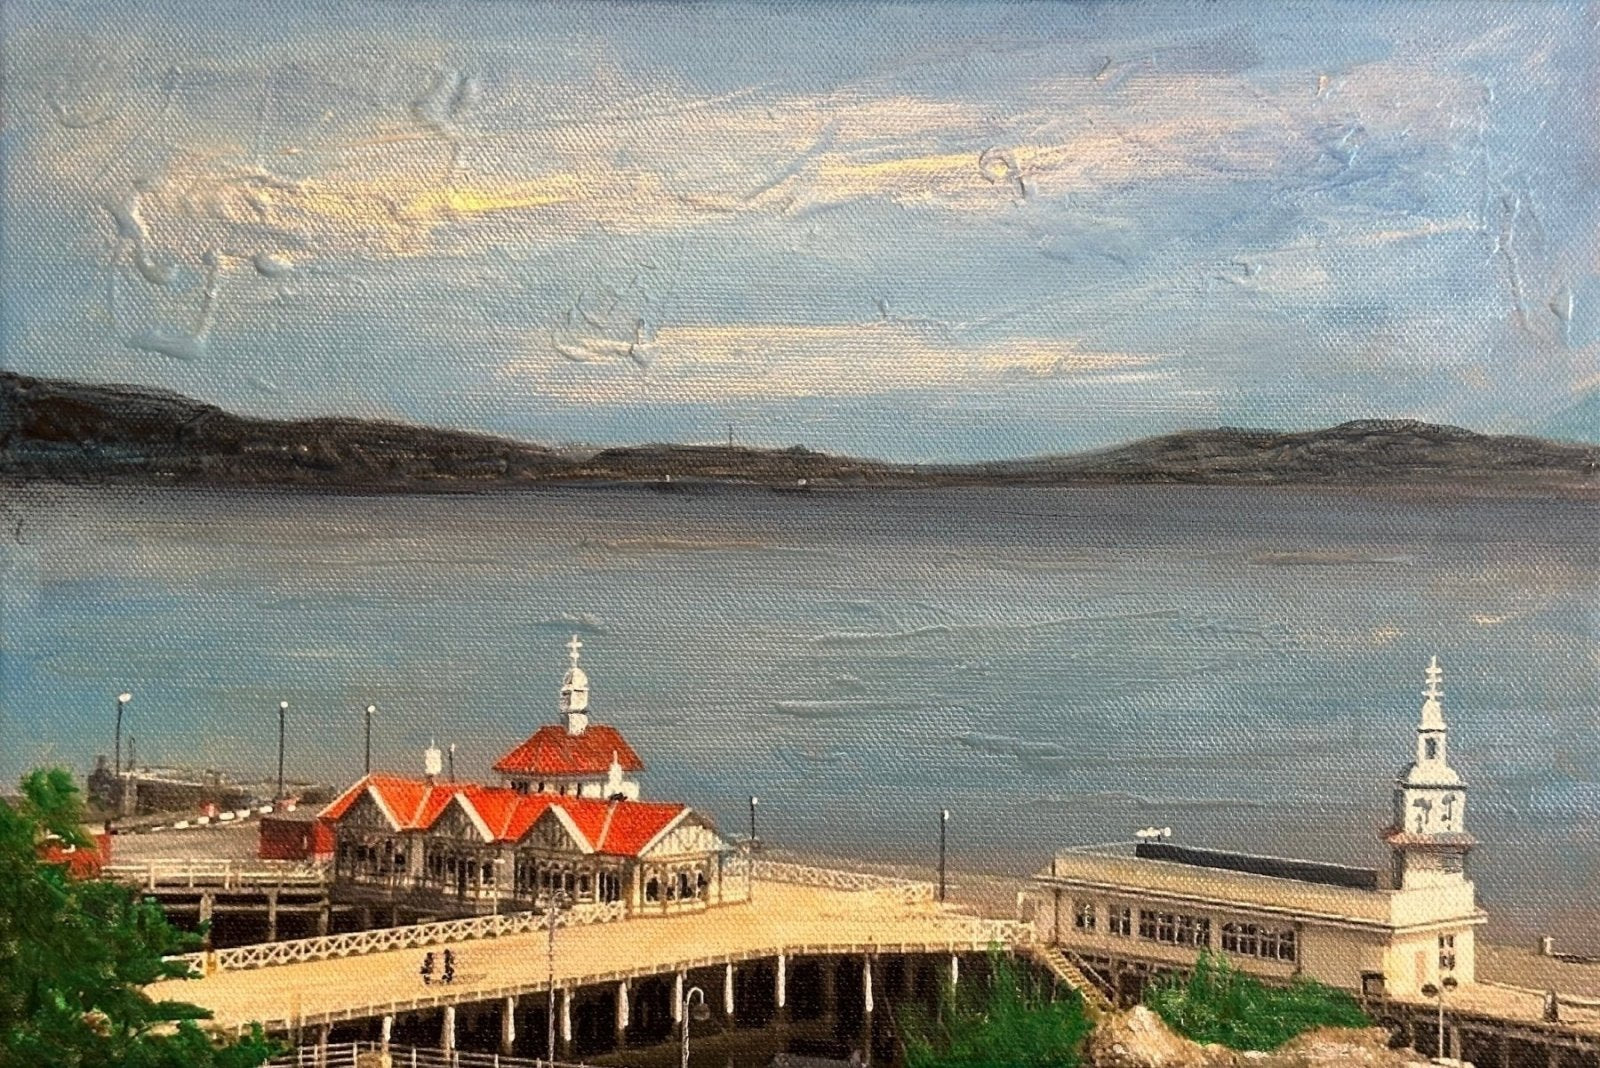 Looking From Dunoon-Signed Art Prints By Scottish Artist Hunter-River Clyde Art Gallery-Paintings, Prints, Homeware, Art Gifts From Scotland By Scottish Artist Kevin Hunter